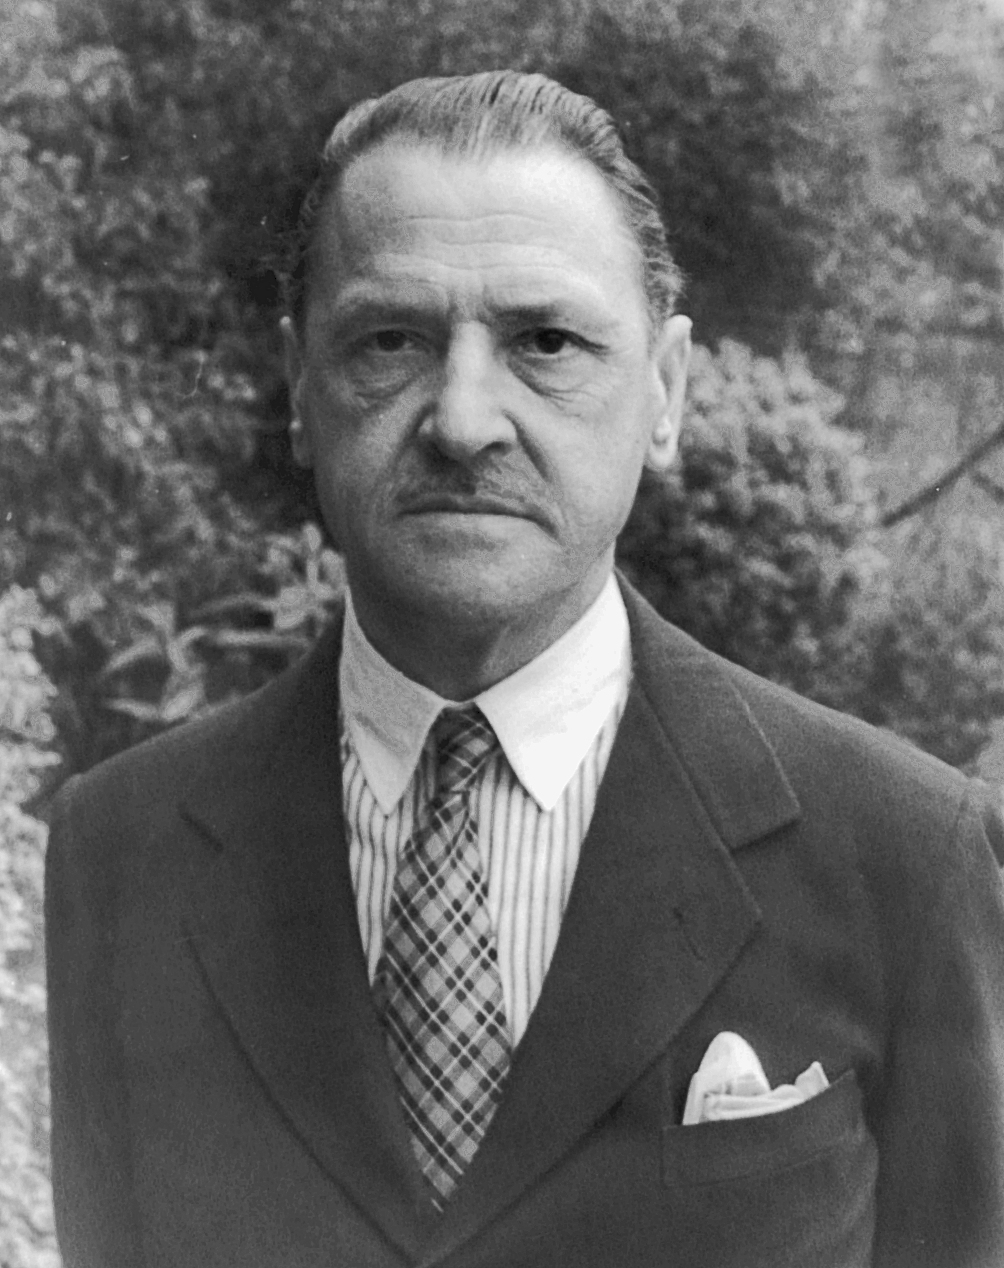 W. Somerset Maugham's quote #4